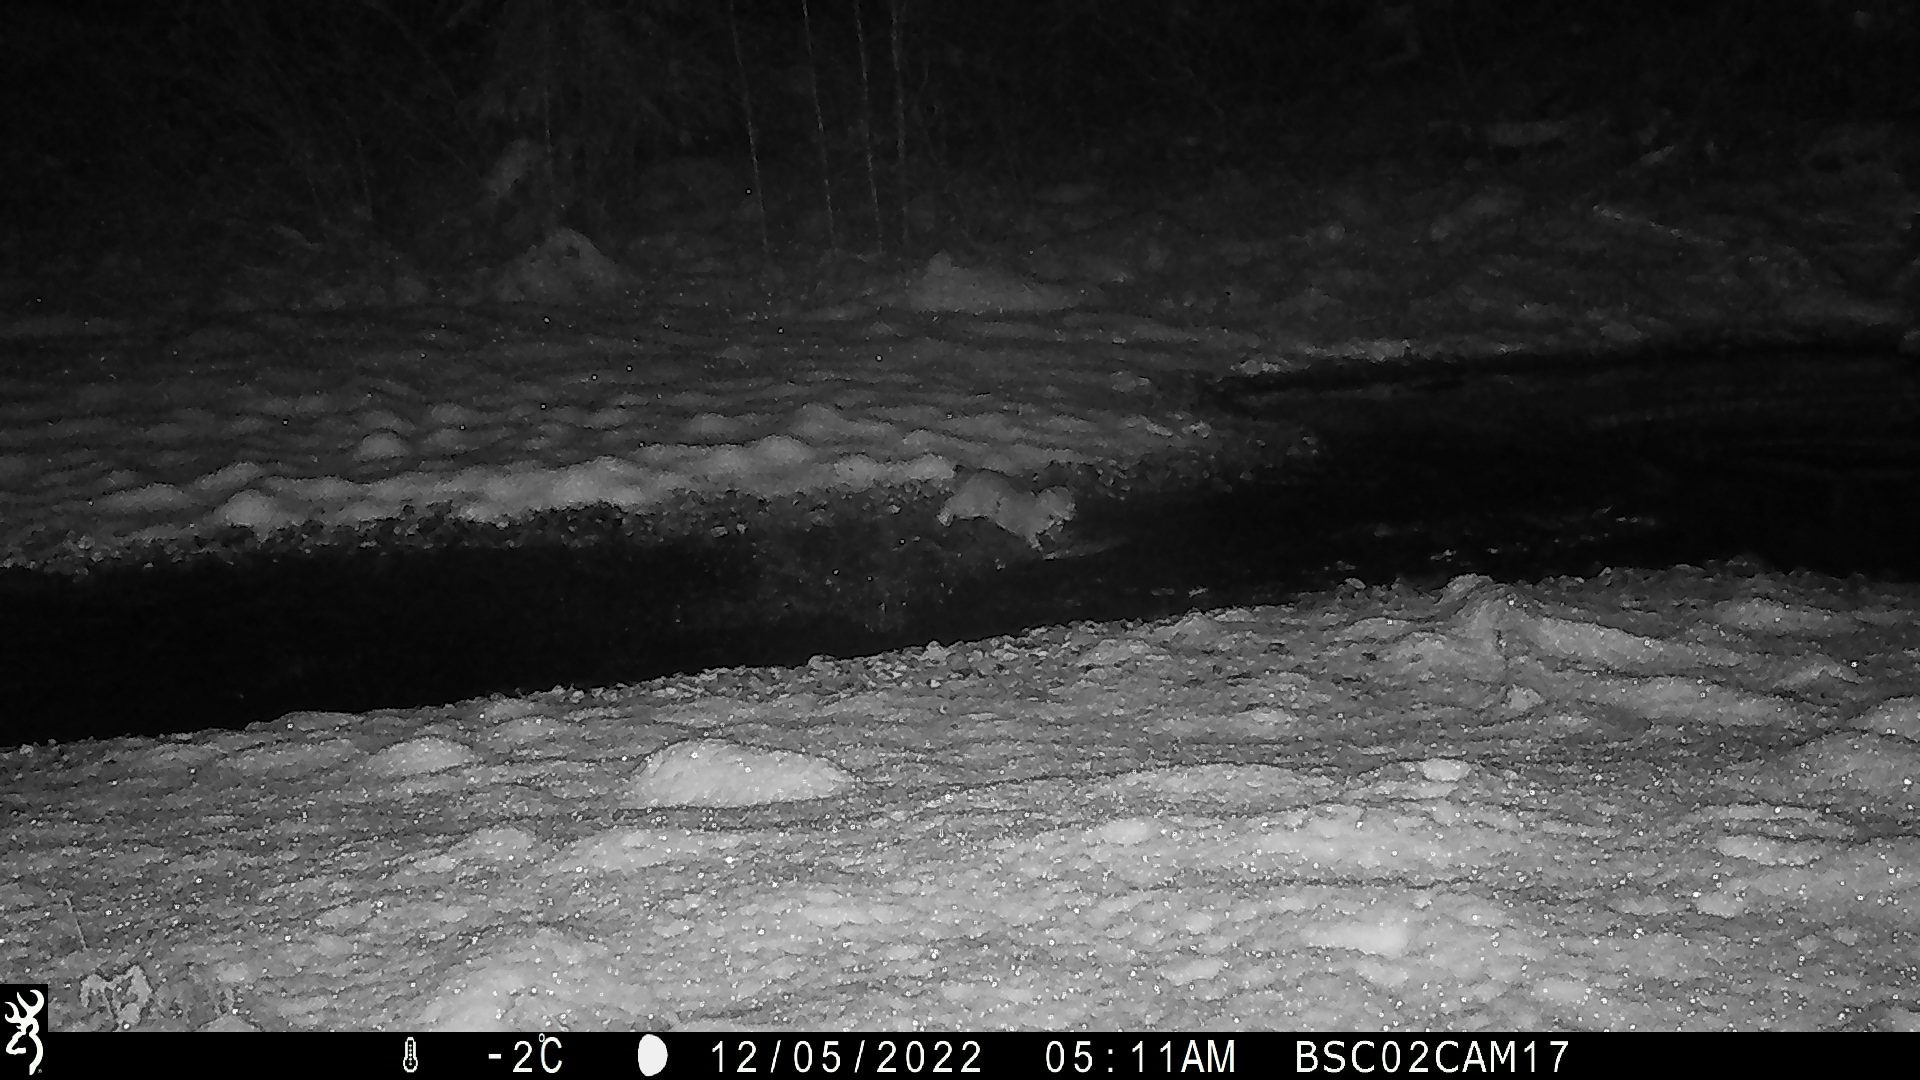 Bobcat trying to catch salmon in the river.